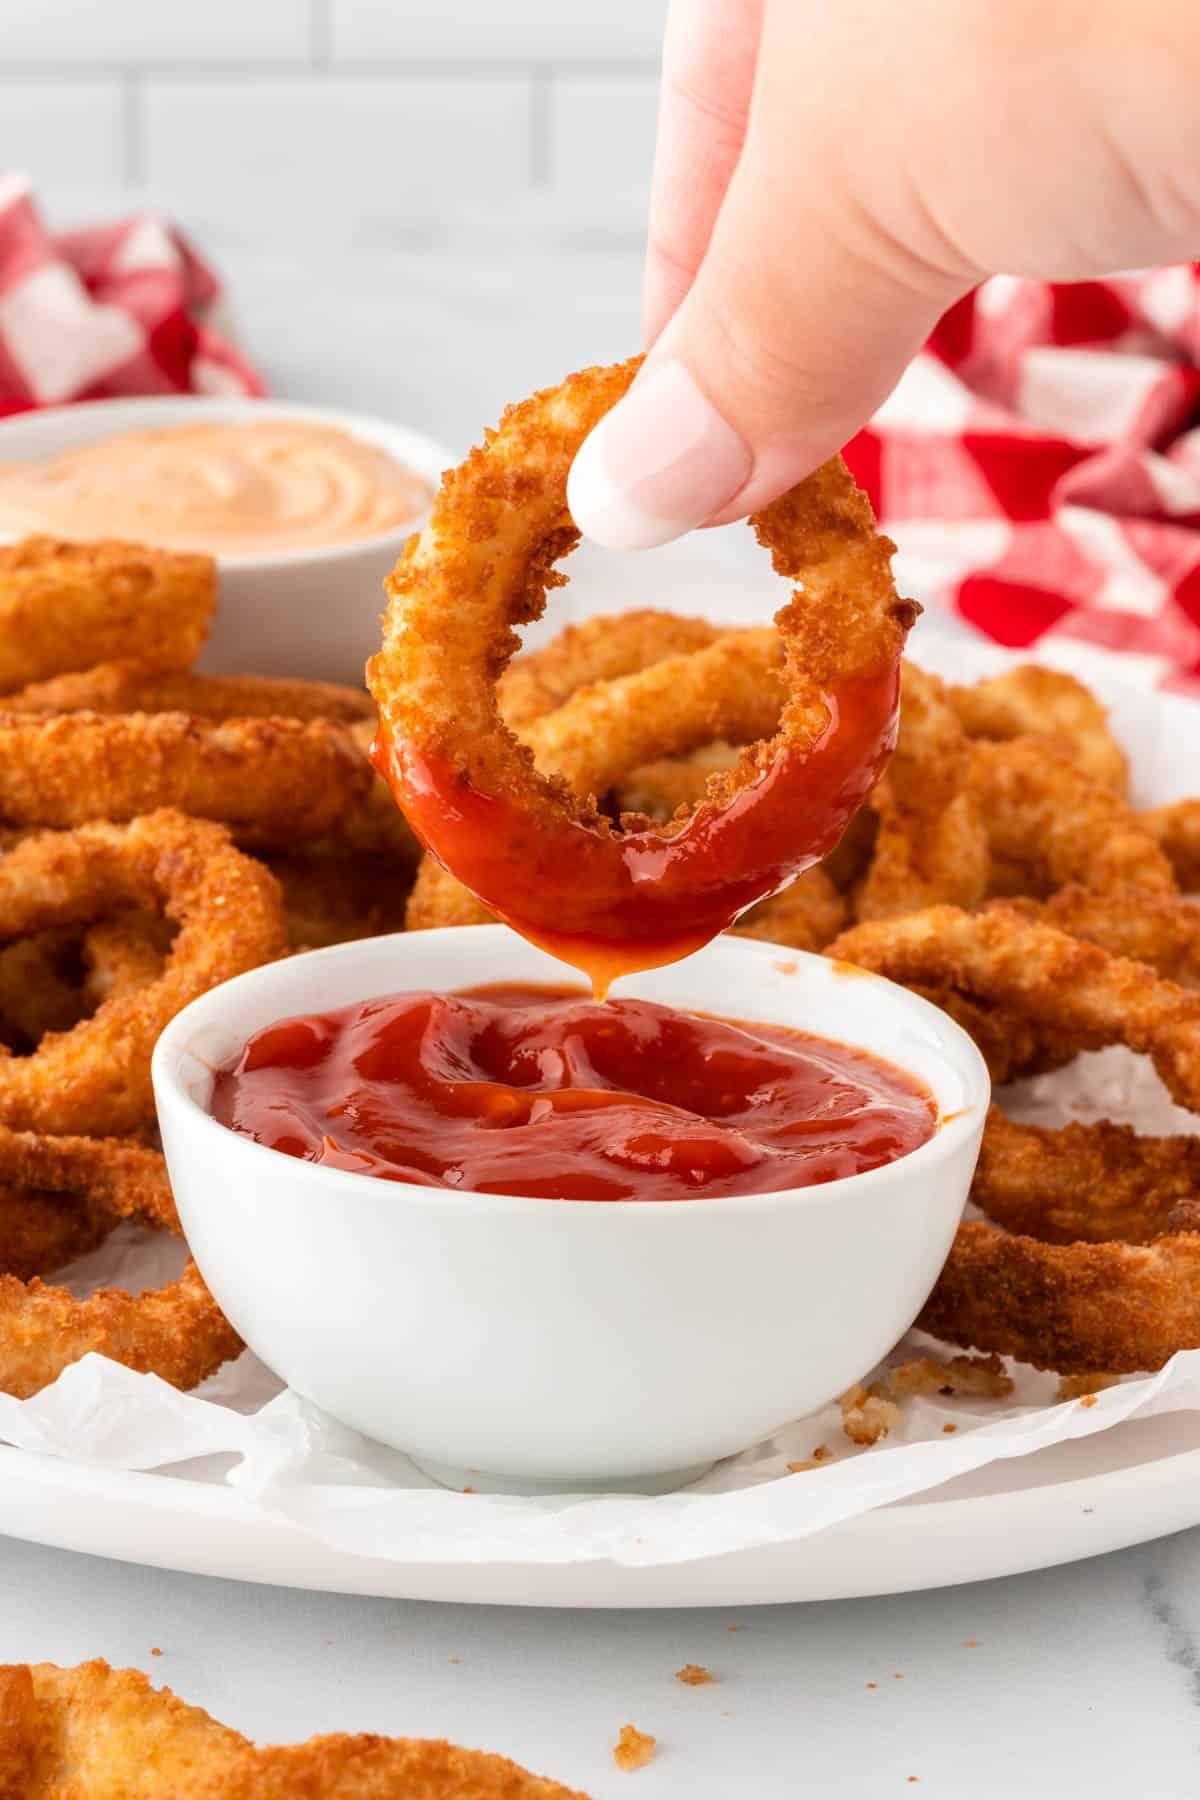 dipping an onion ring into ketchup